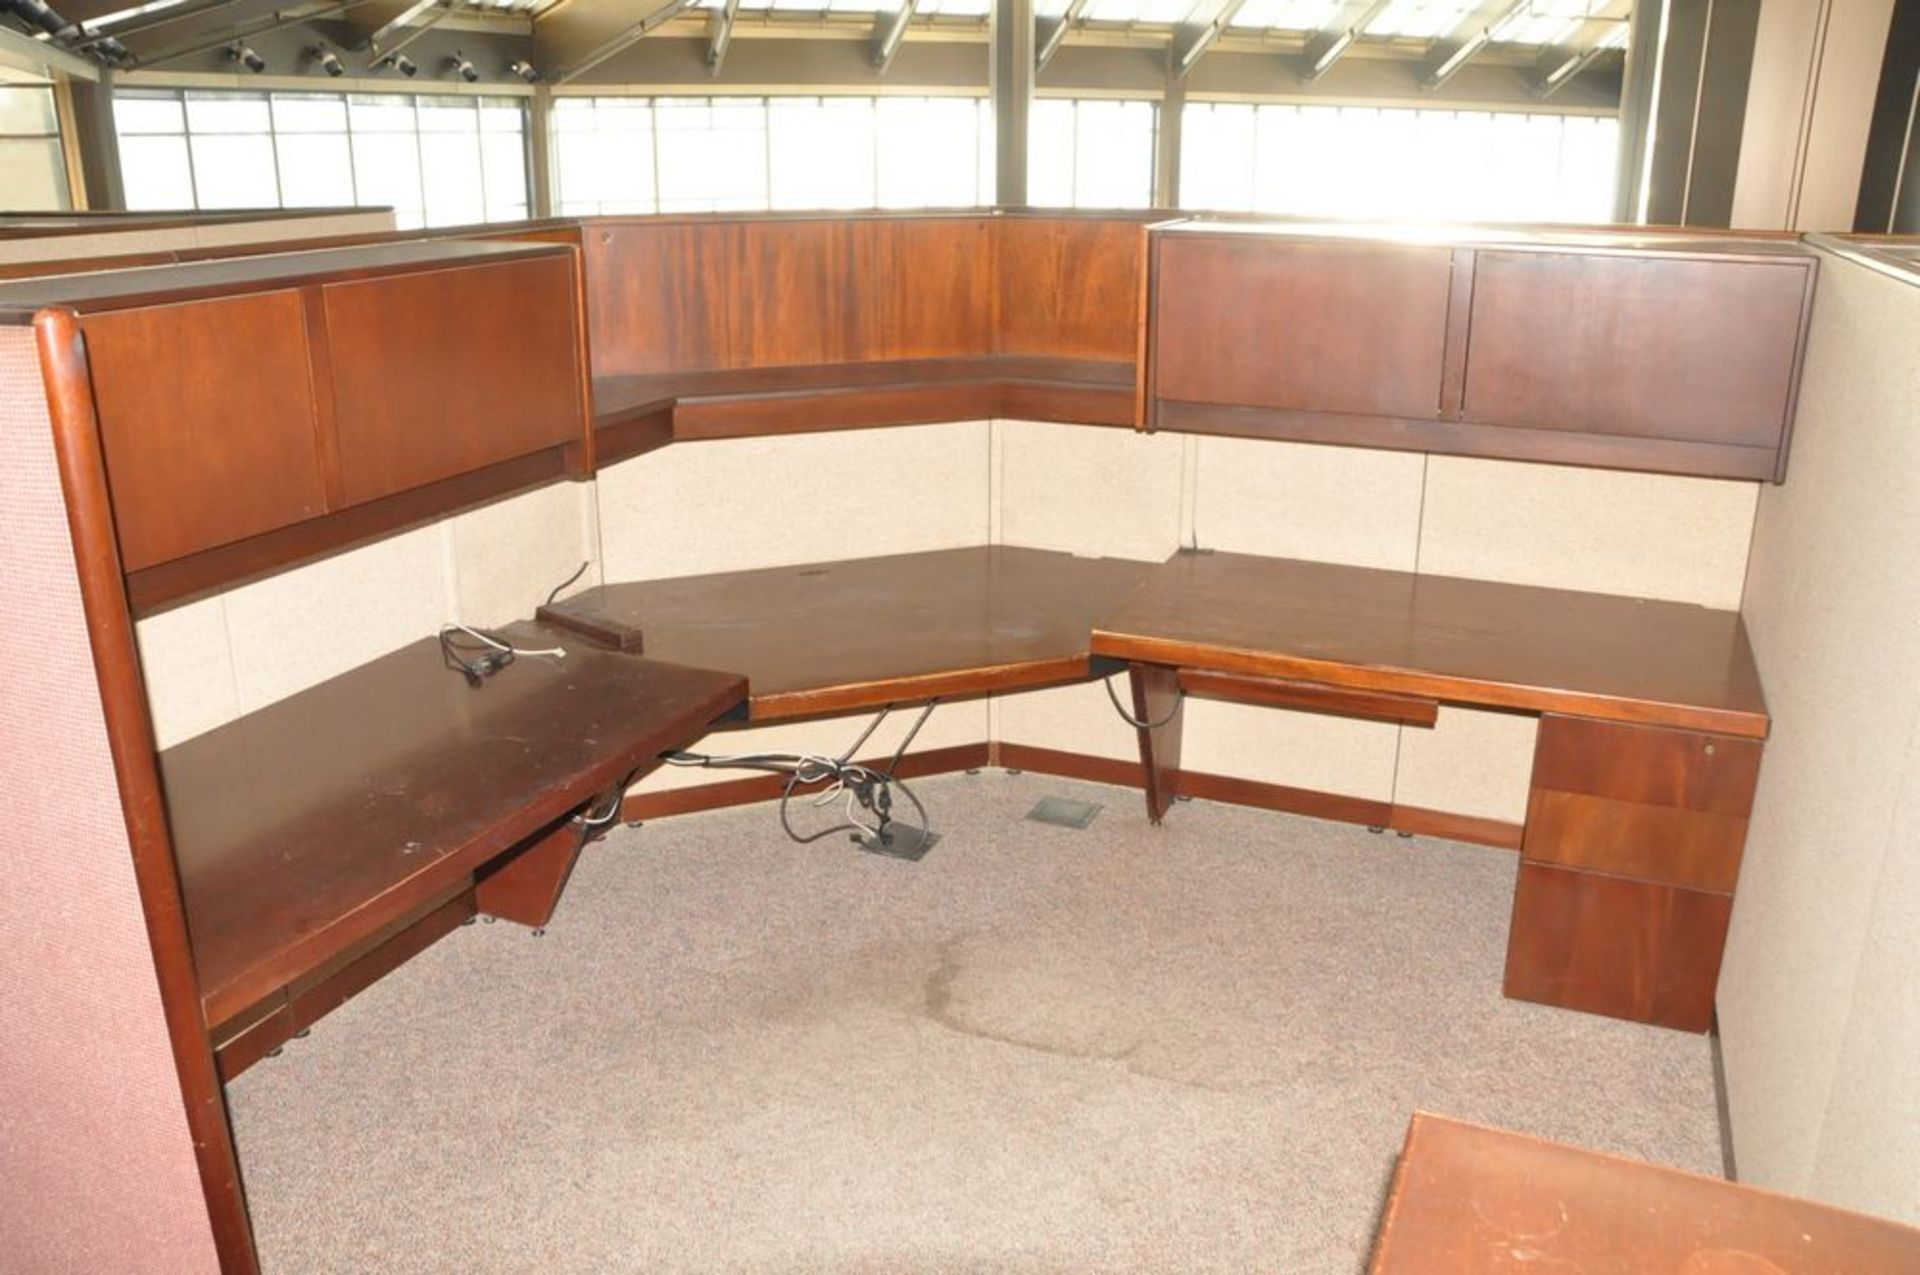 Lot-(5) Station Cubical Partition Work System with Furniture, (Atrium Edge), (4th Floor) - Image 10 of 13